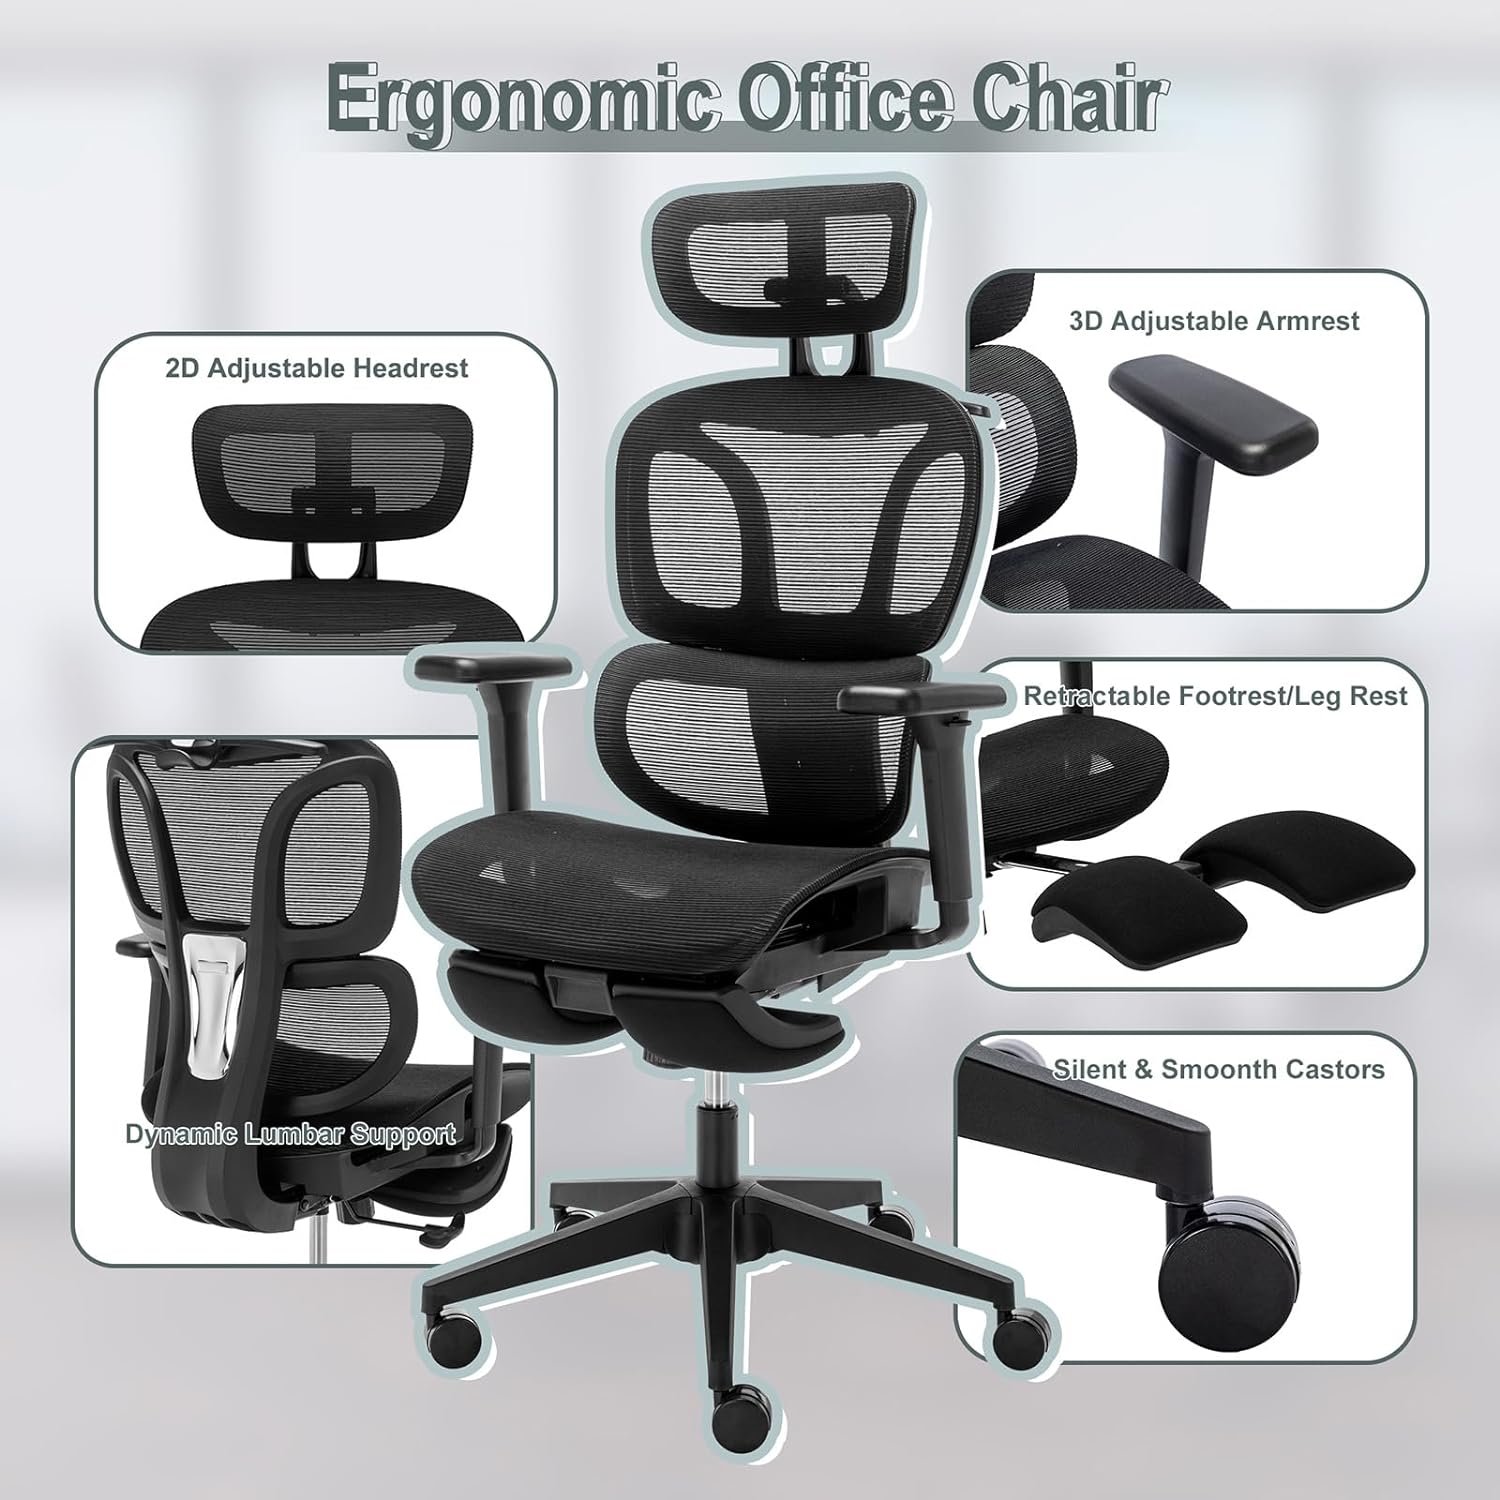 Ergonomic Office Chair with Footrest, High Back Computer Office Chair with Dynamic Lumbar Support, 2D Headrest, 2D Armrest, Sponge Seat, Mesh Home Office Desk Chair for Adults, Cream